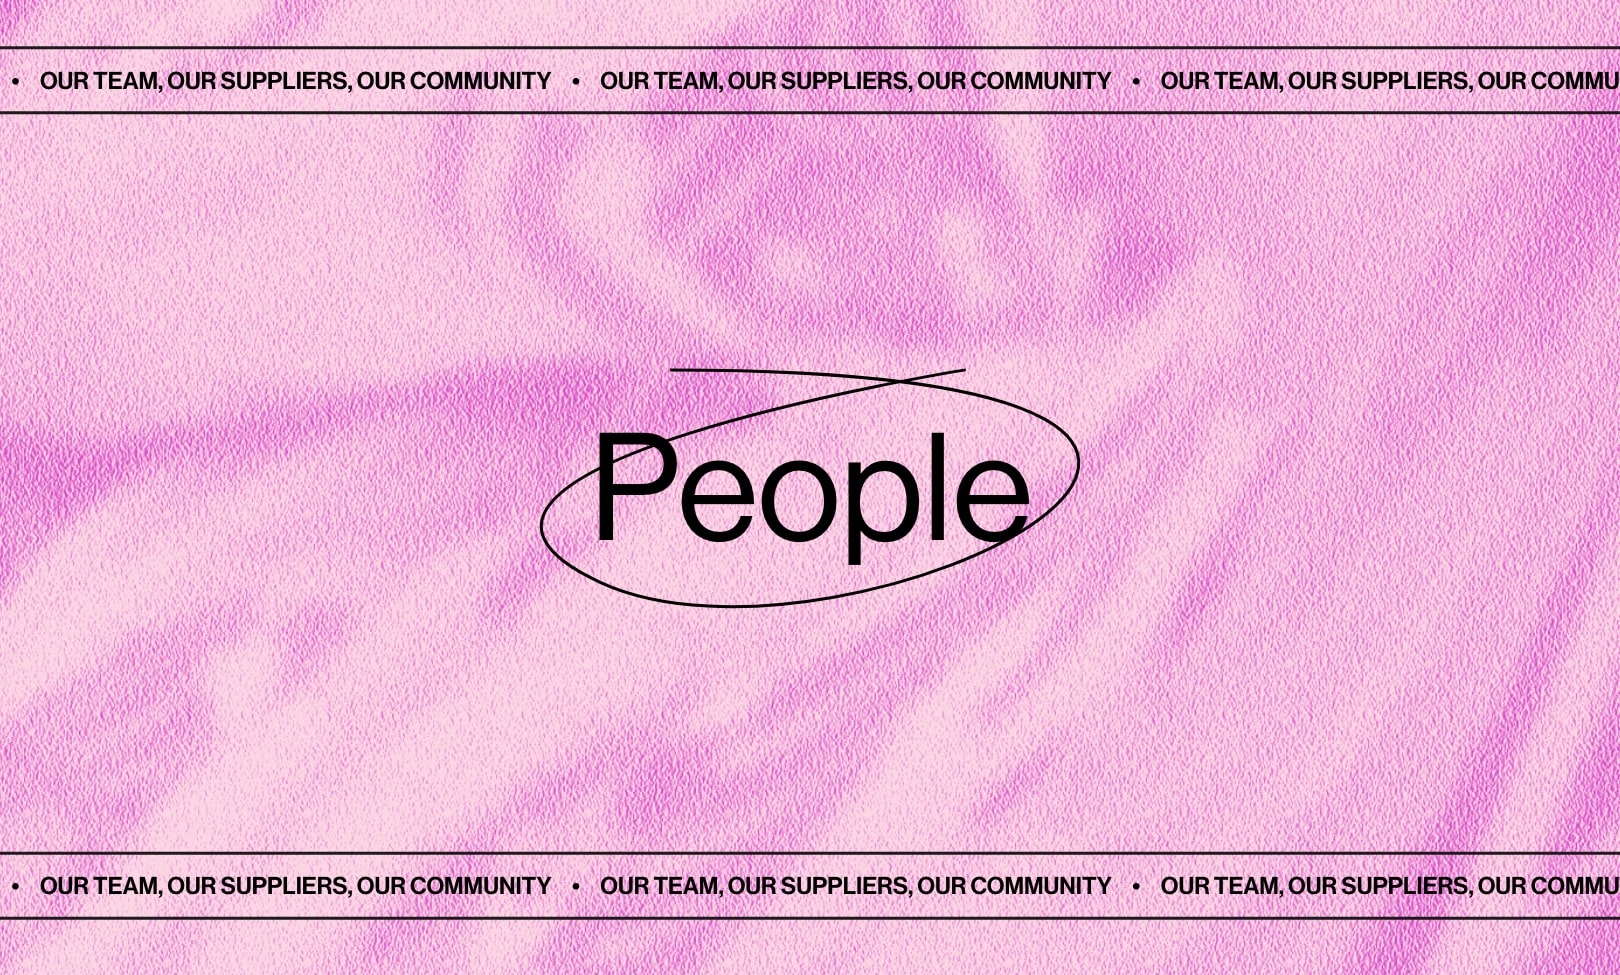 Our Brand Responsibility: People